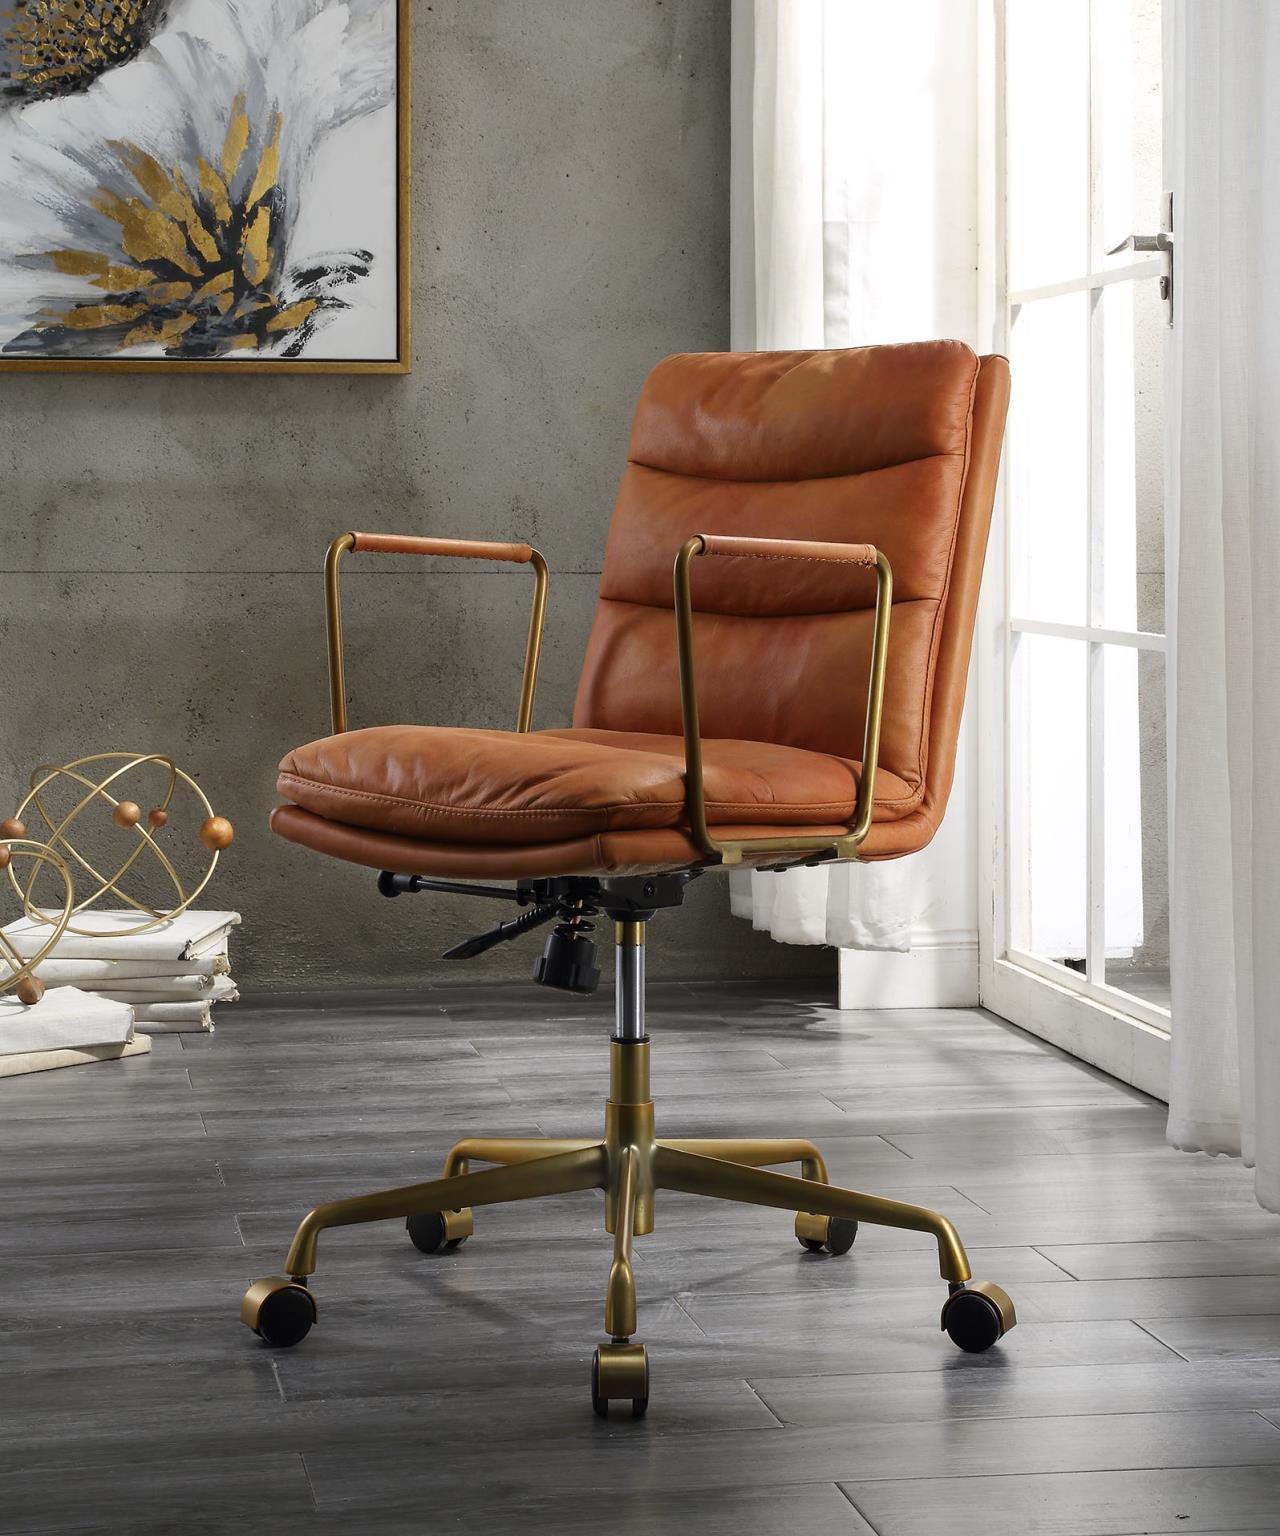 

    
Home Office Executive Chair Rust Top Grain Leather Dudley 92498 Acme Industrial
